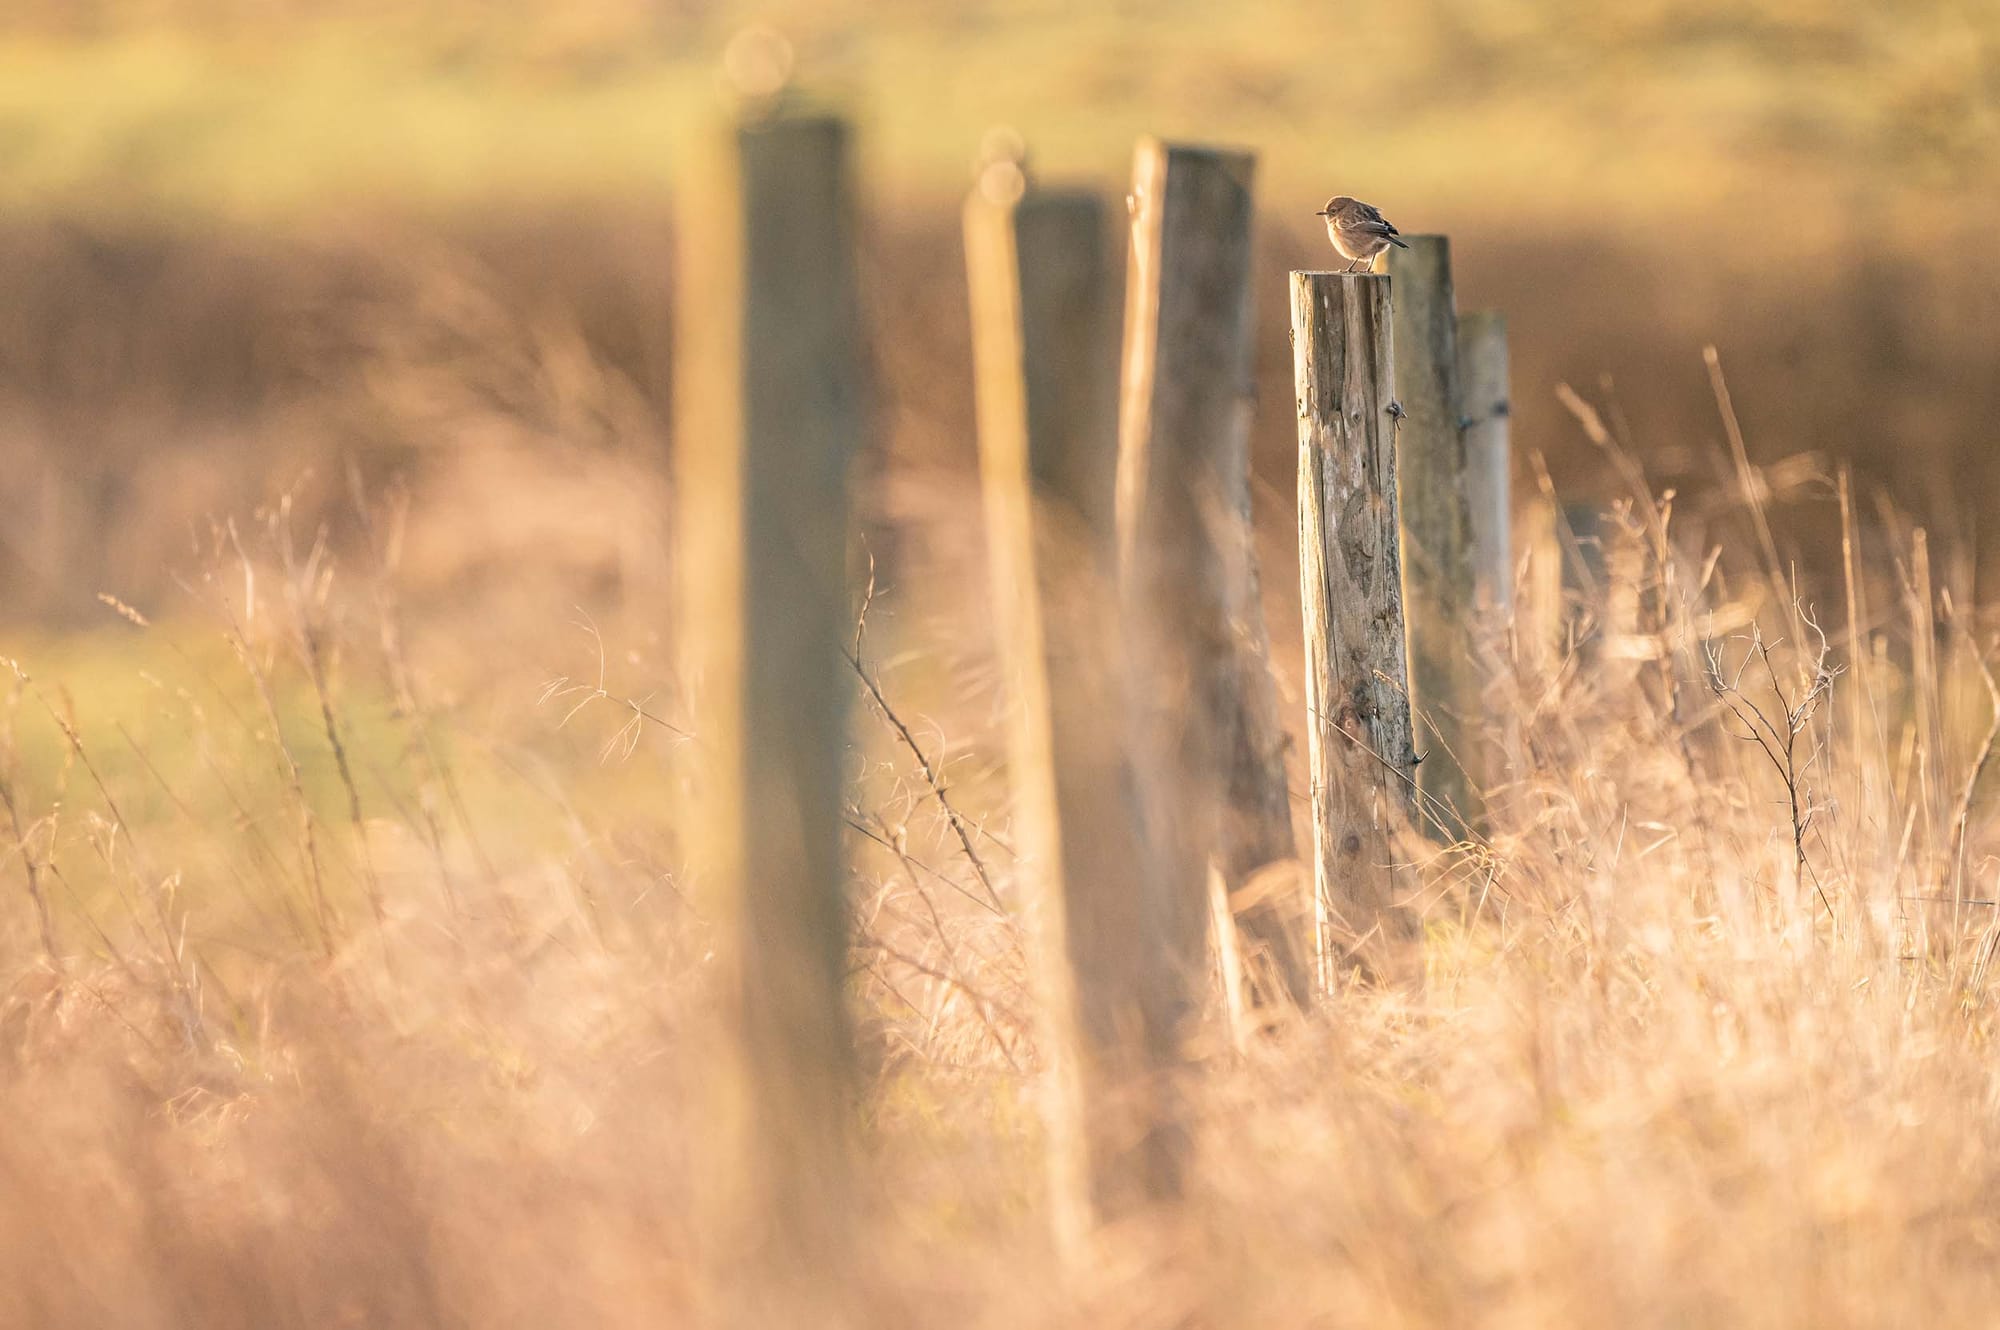 A small bird perched on a fence post in a golden grassy landscape